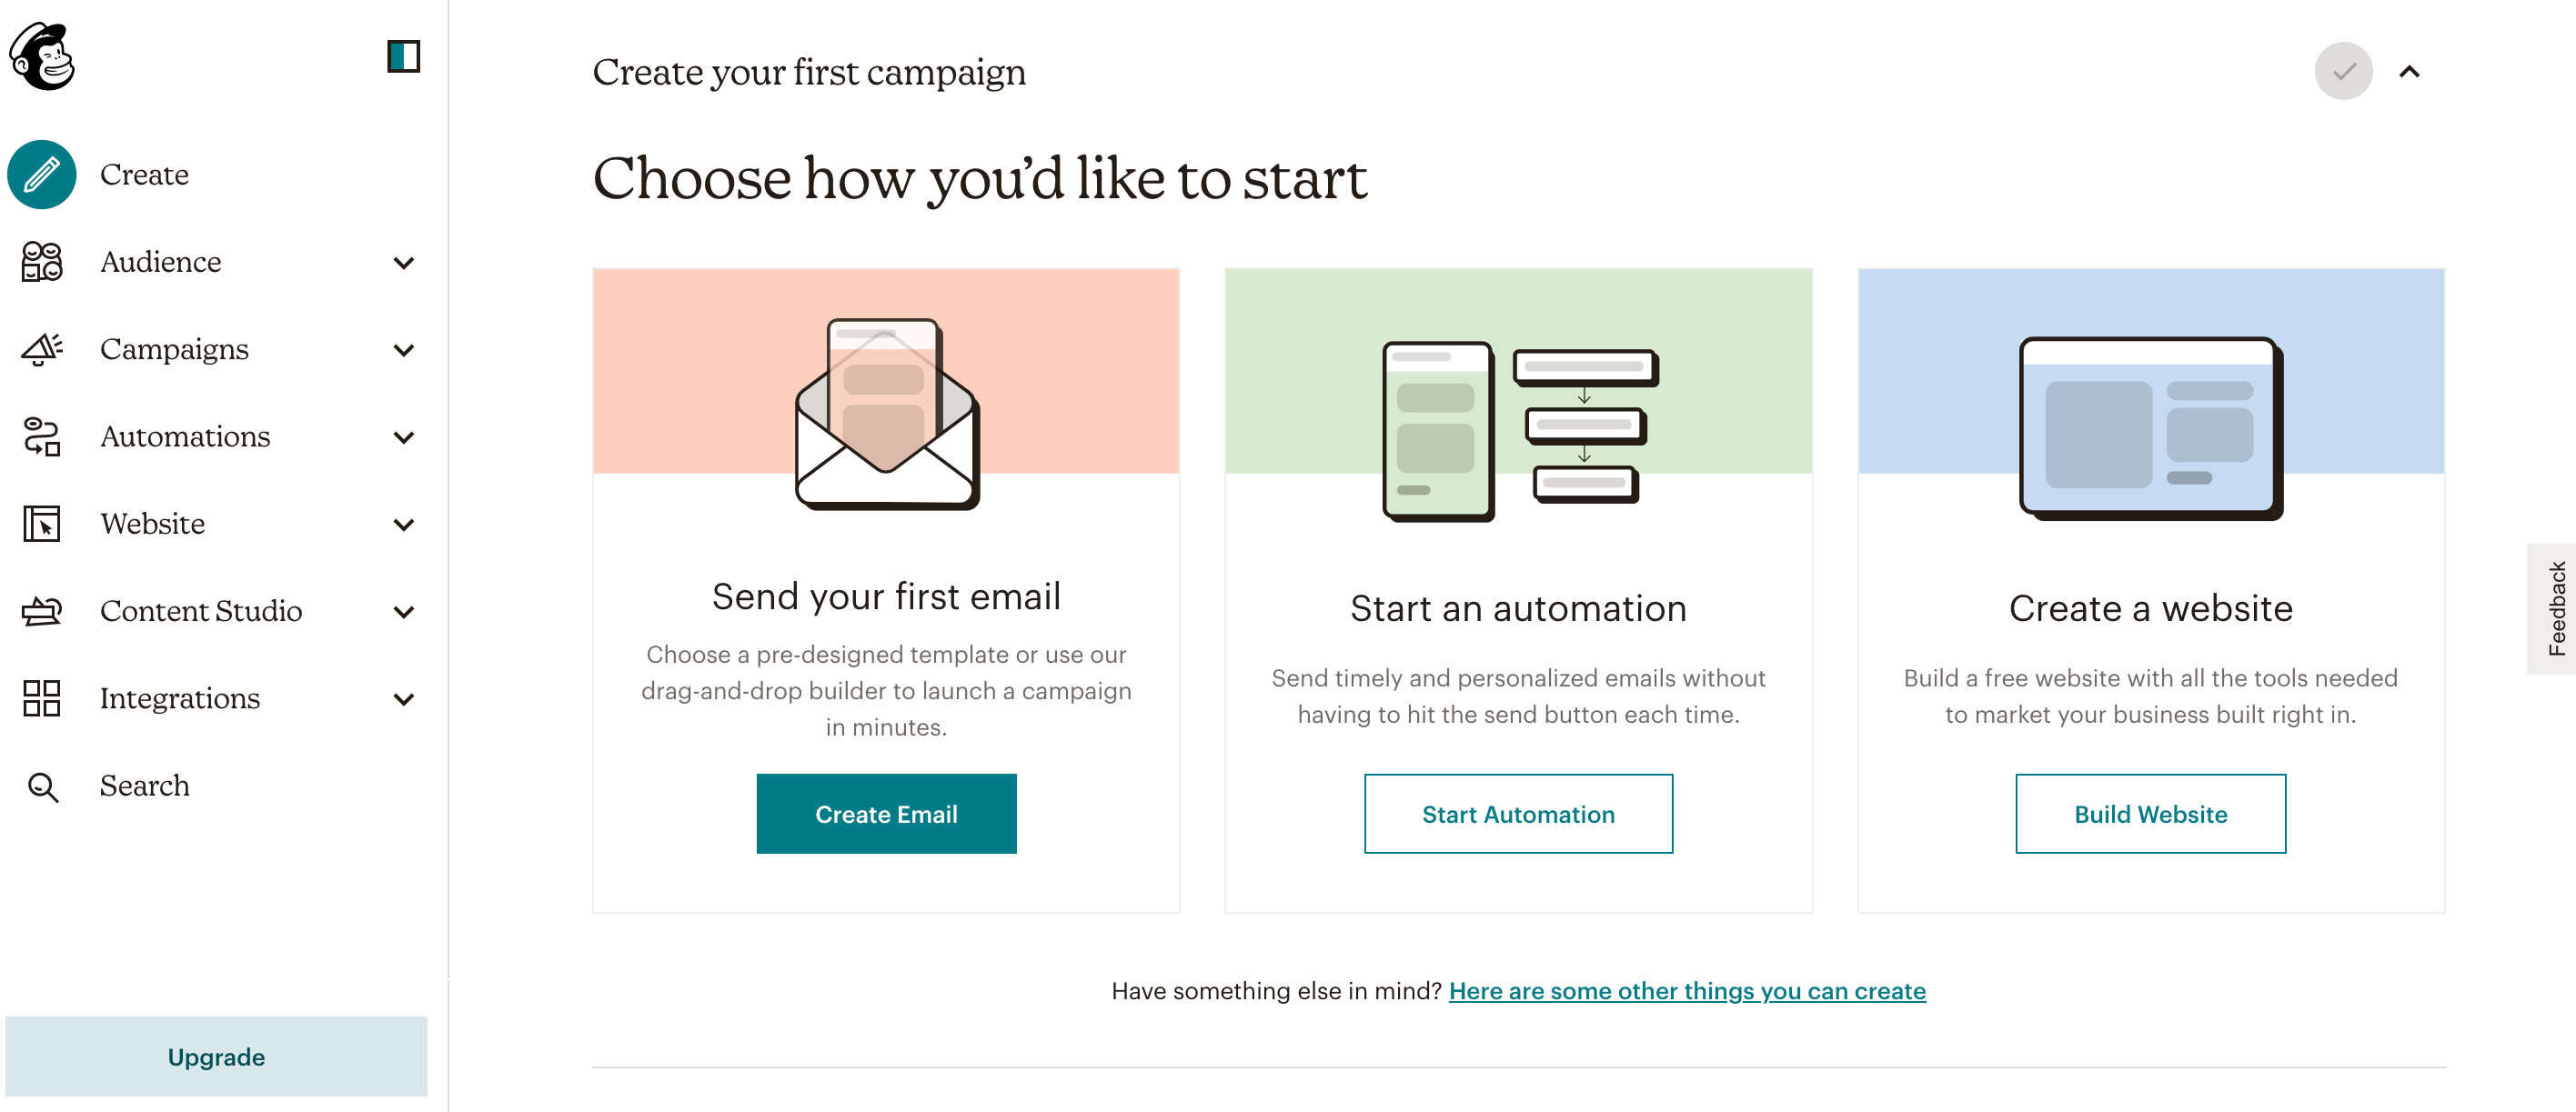 MailChimp product-led sales tool